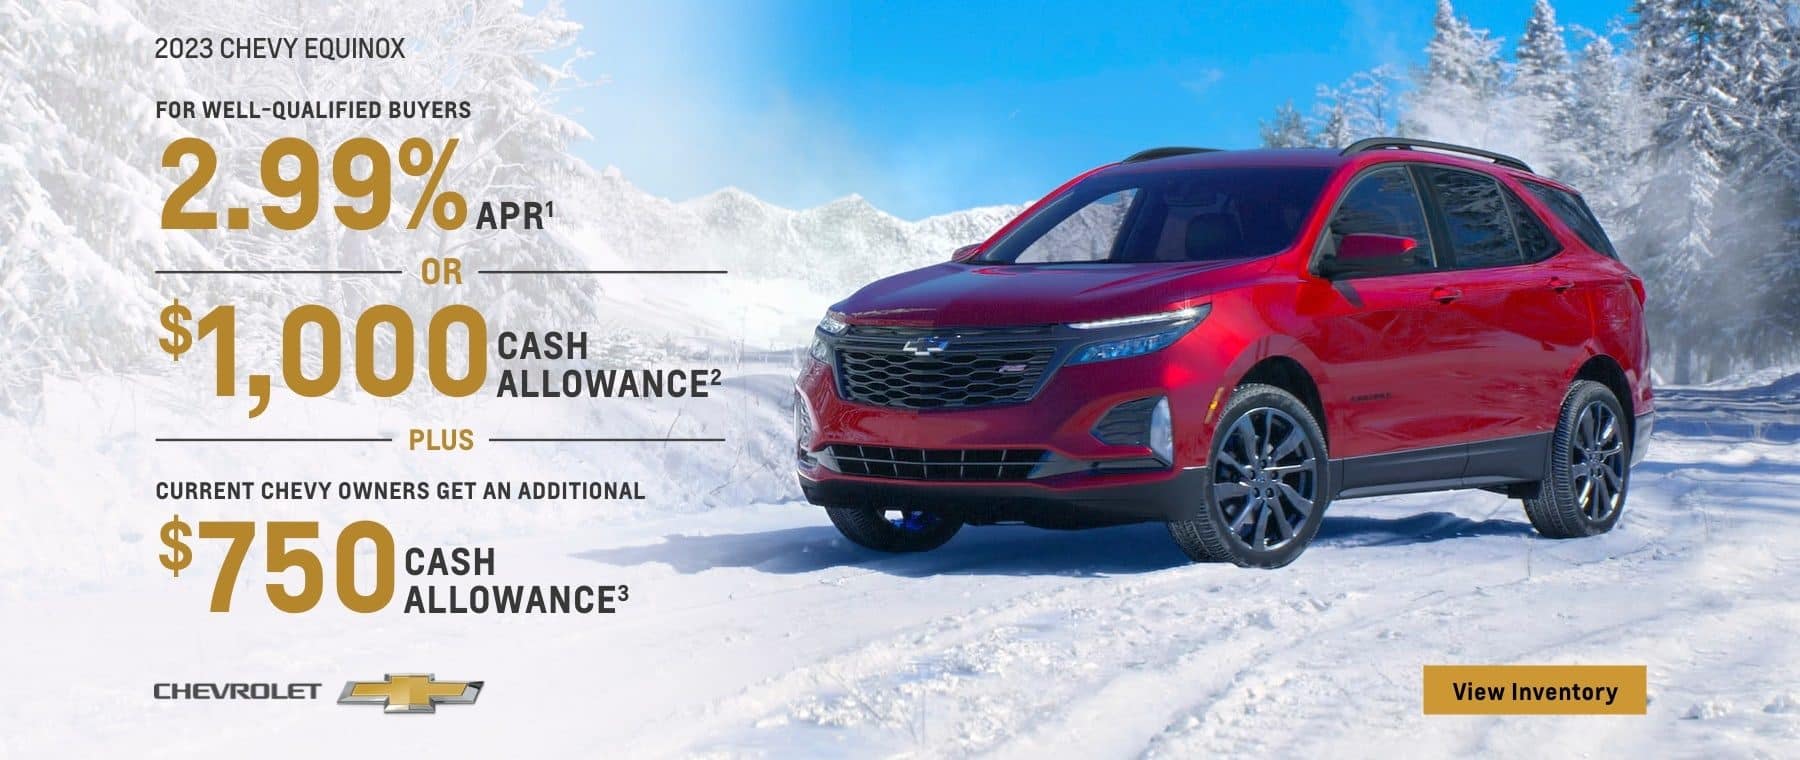 2023 Chevy Equinox. For well-qualified buyers 2.99% APR. Or, $1,000 cash allowance. Plus, current Chevy owners get an additional $750 cash allowance.